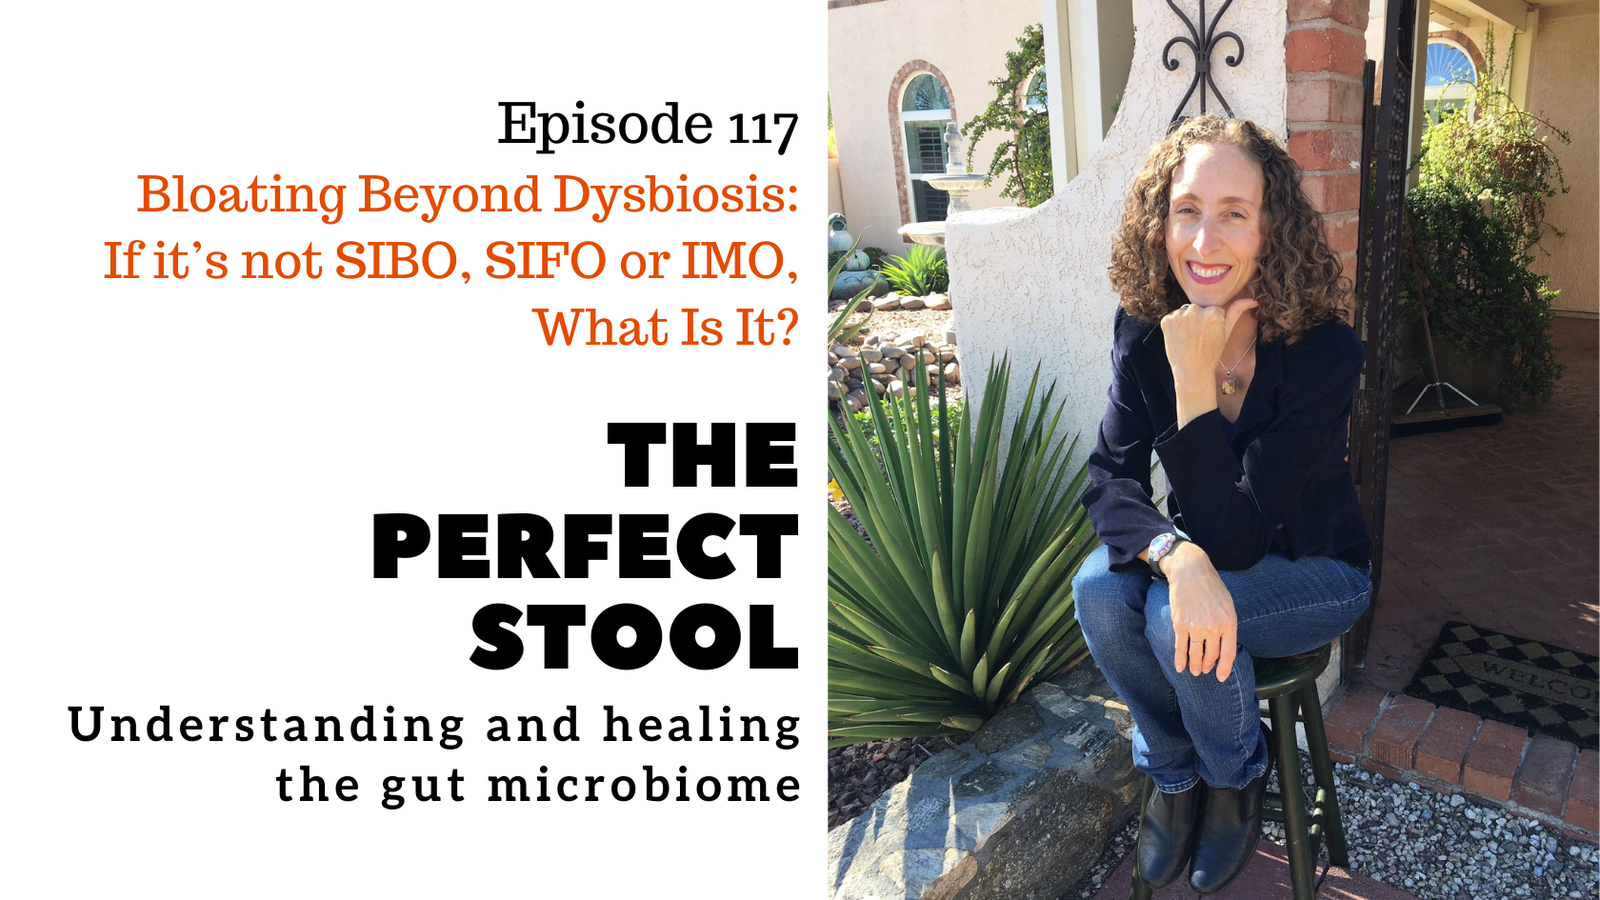 Bloating Beyond Dysbiosis: If it’s not SIBO, SIFO or IMO, What Is It?